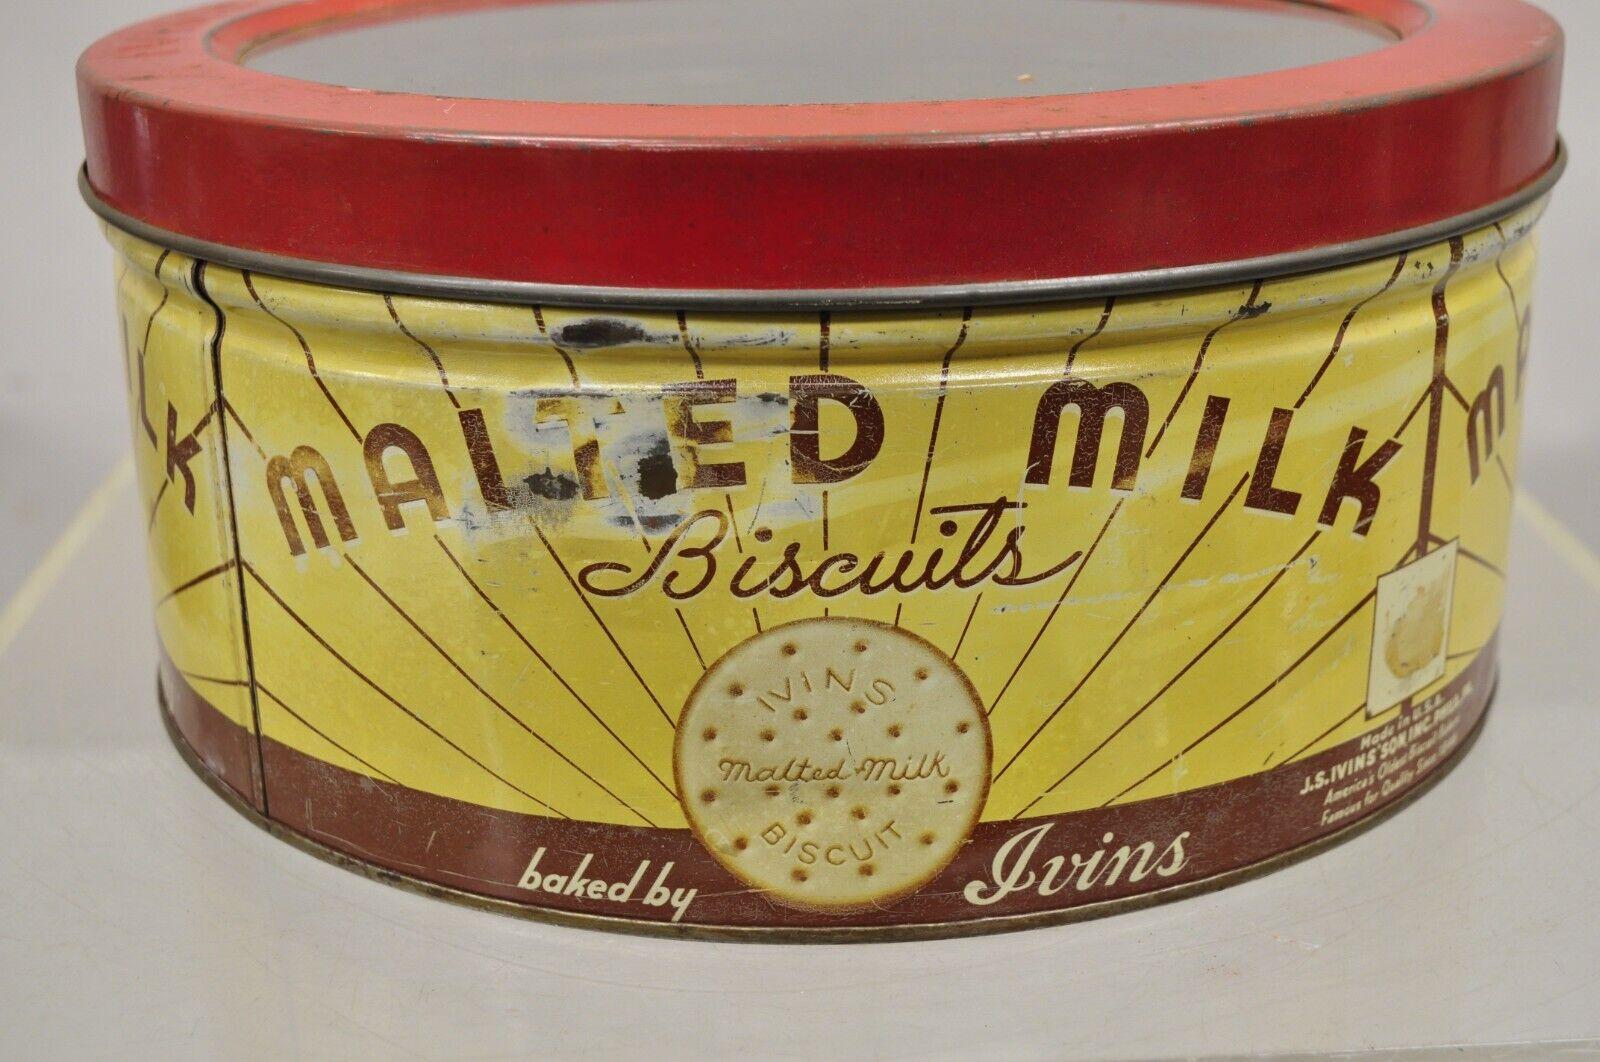 Vintage J.S. Ivins Son Inc. Malted Milk Biscuits Round Glass Lid Tin Container 1